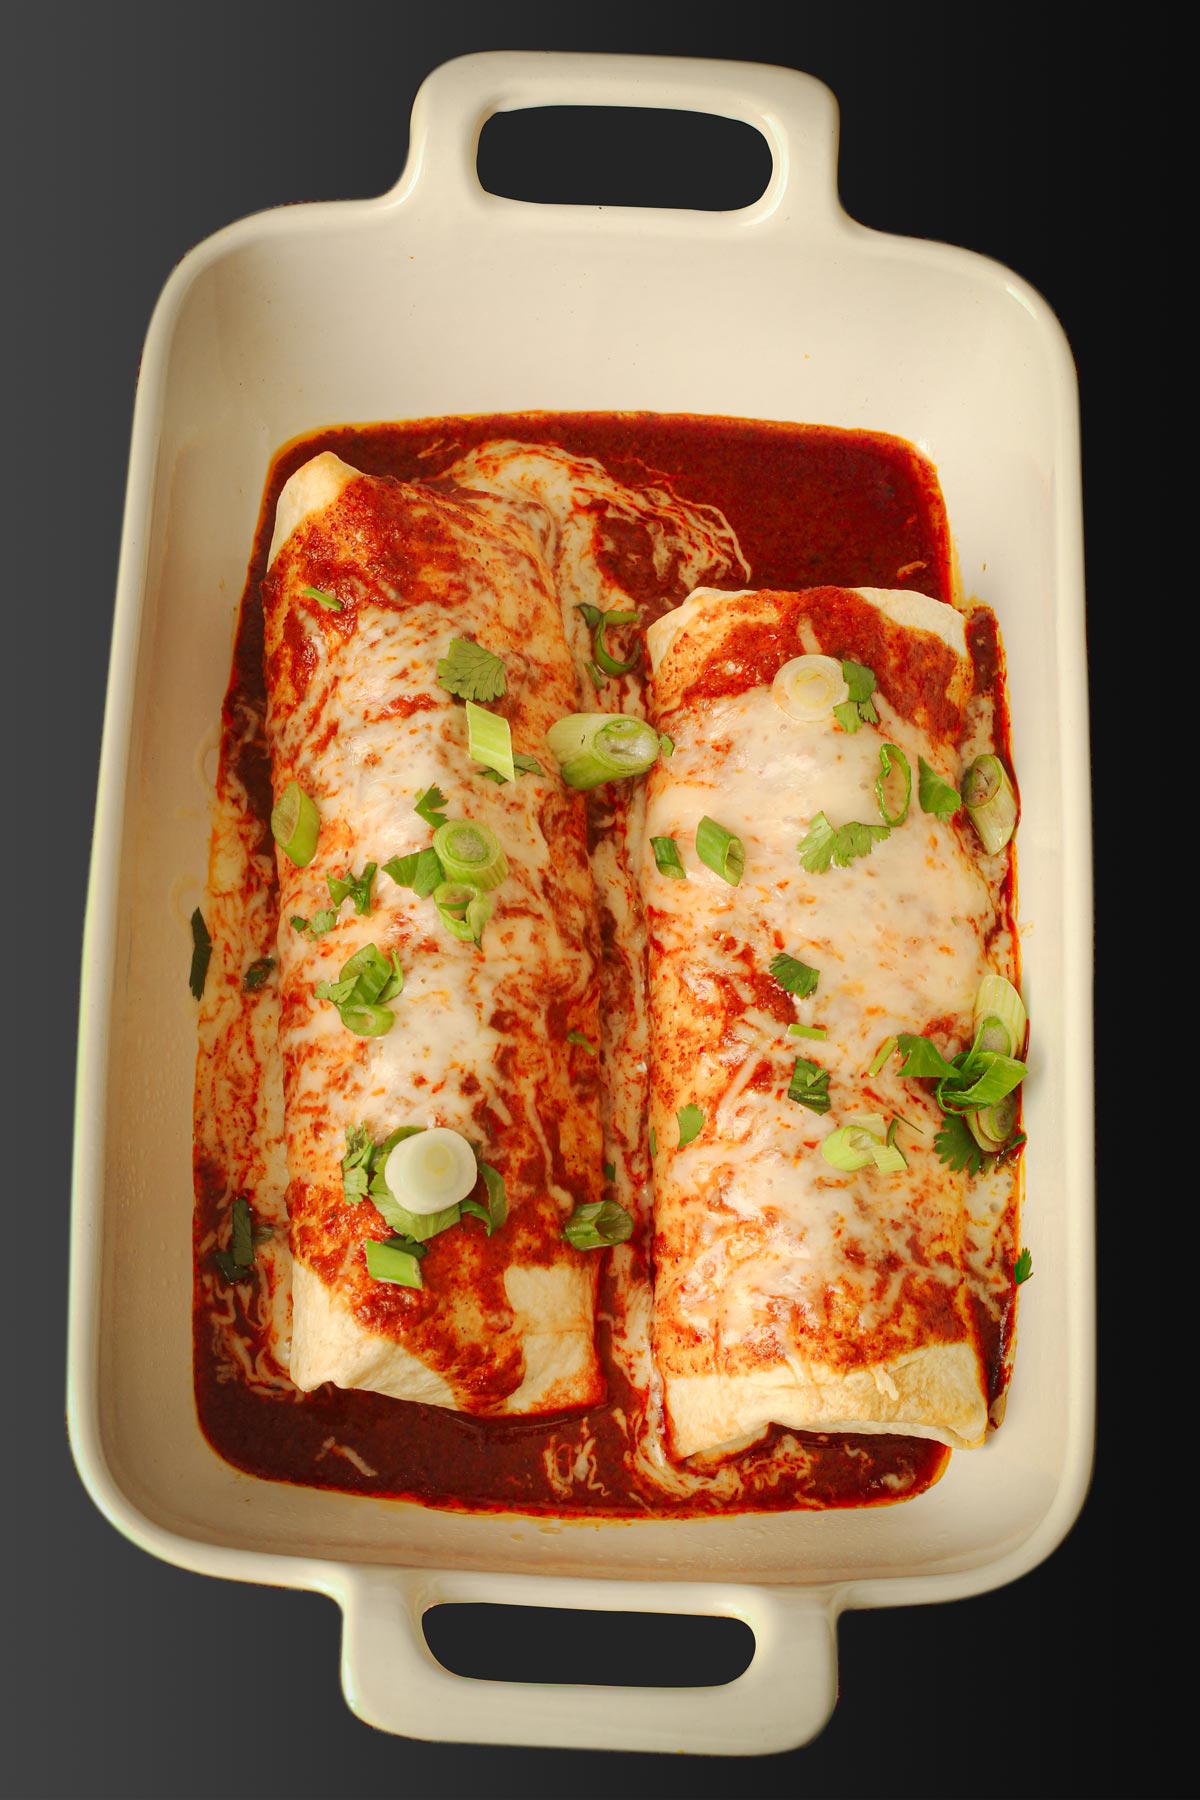 two chimichangas in a baking dish, topped with sauce, cheese, and green onions.